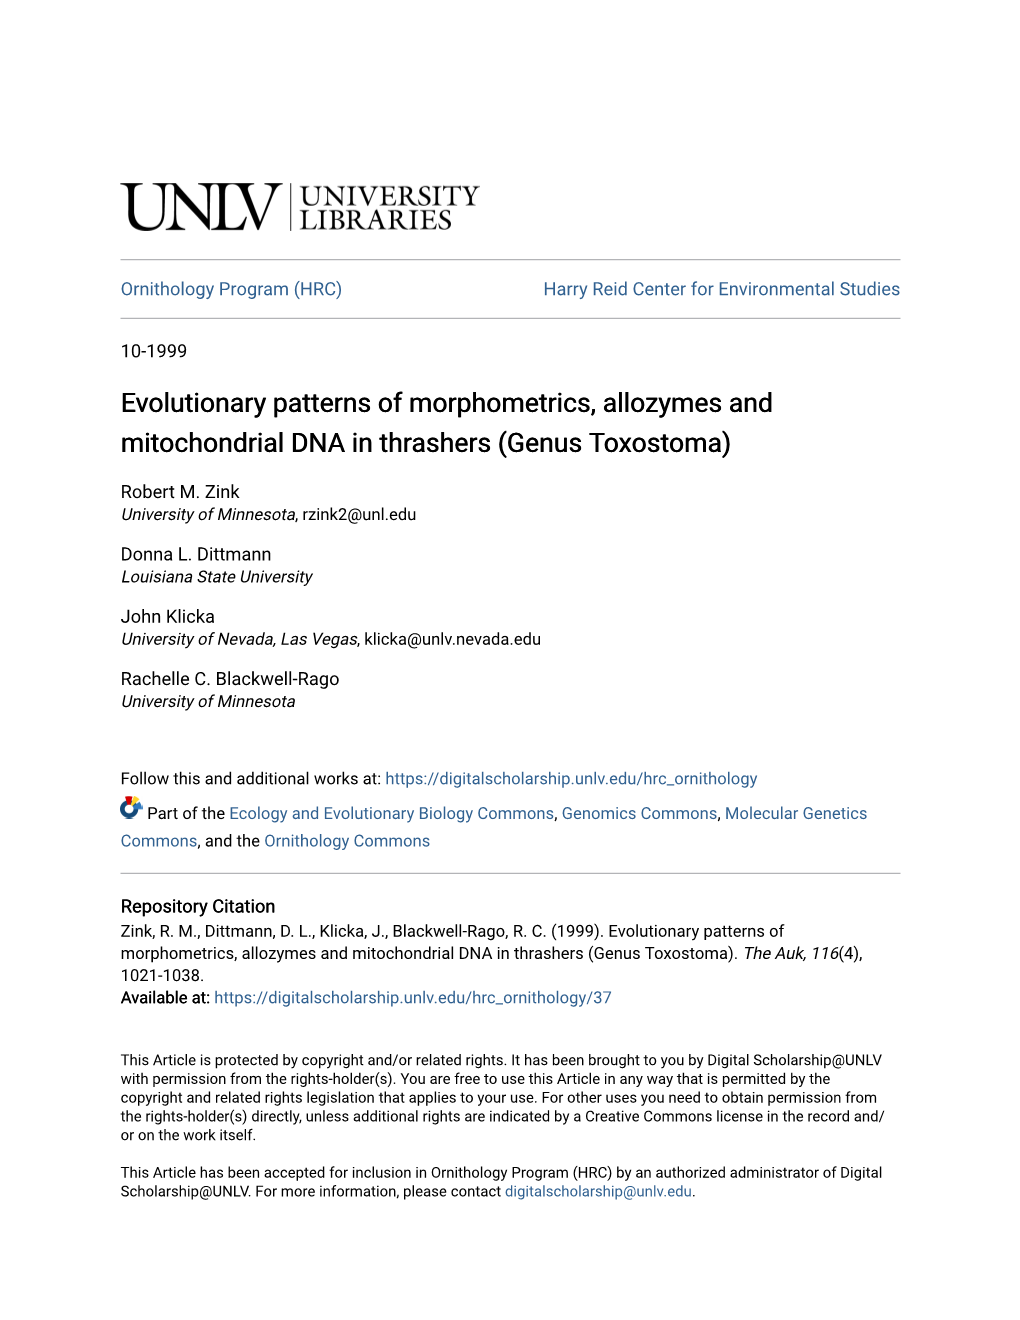 Evolutionary Patterns of Morphometrics, Allozymes and Mitochondrial DNA in Thrashers (Genus Toxostoma)